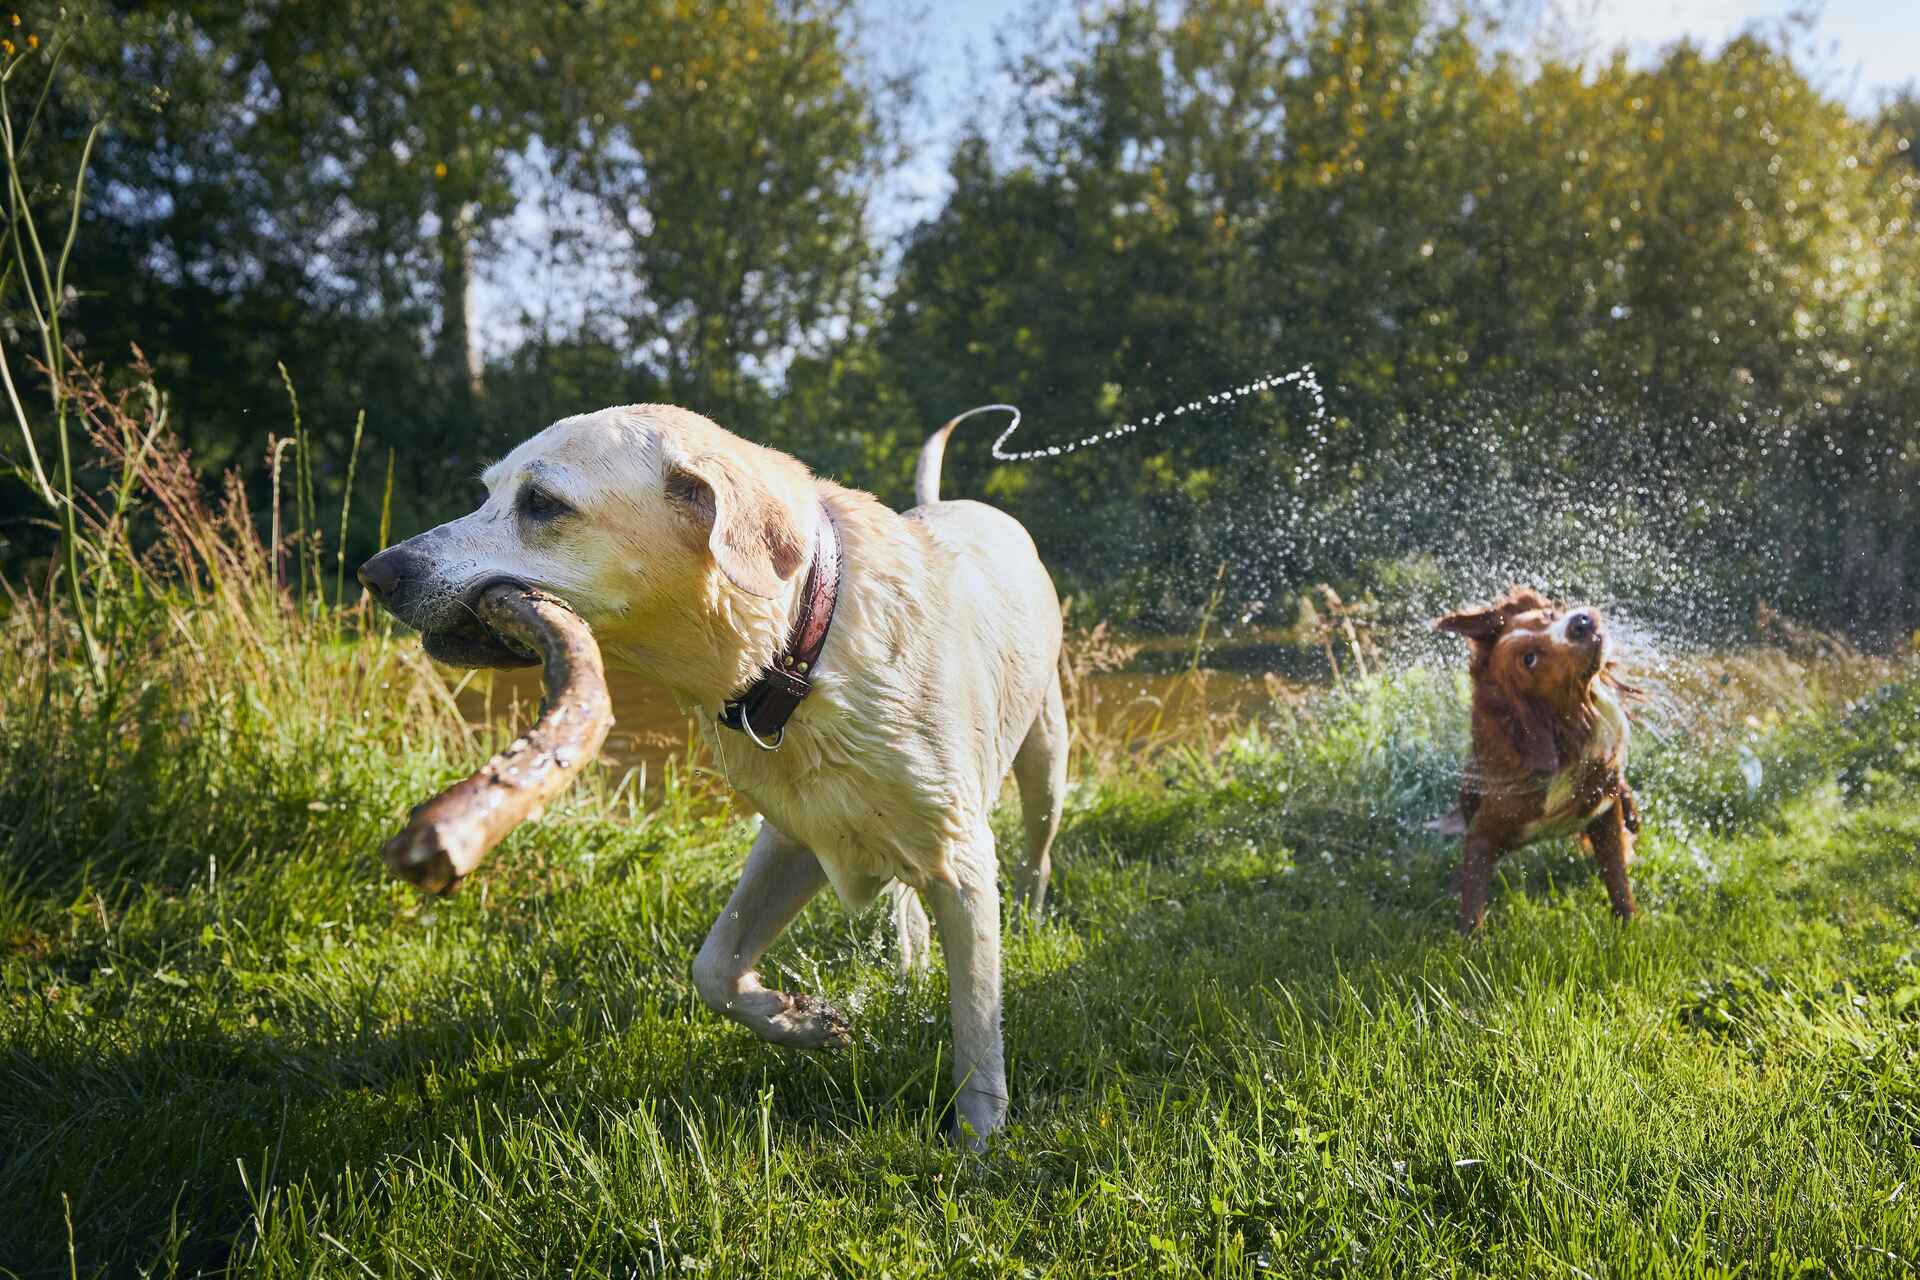 Two dogs playing in a backyard